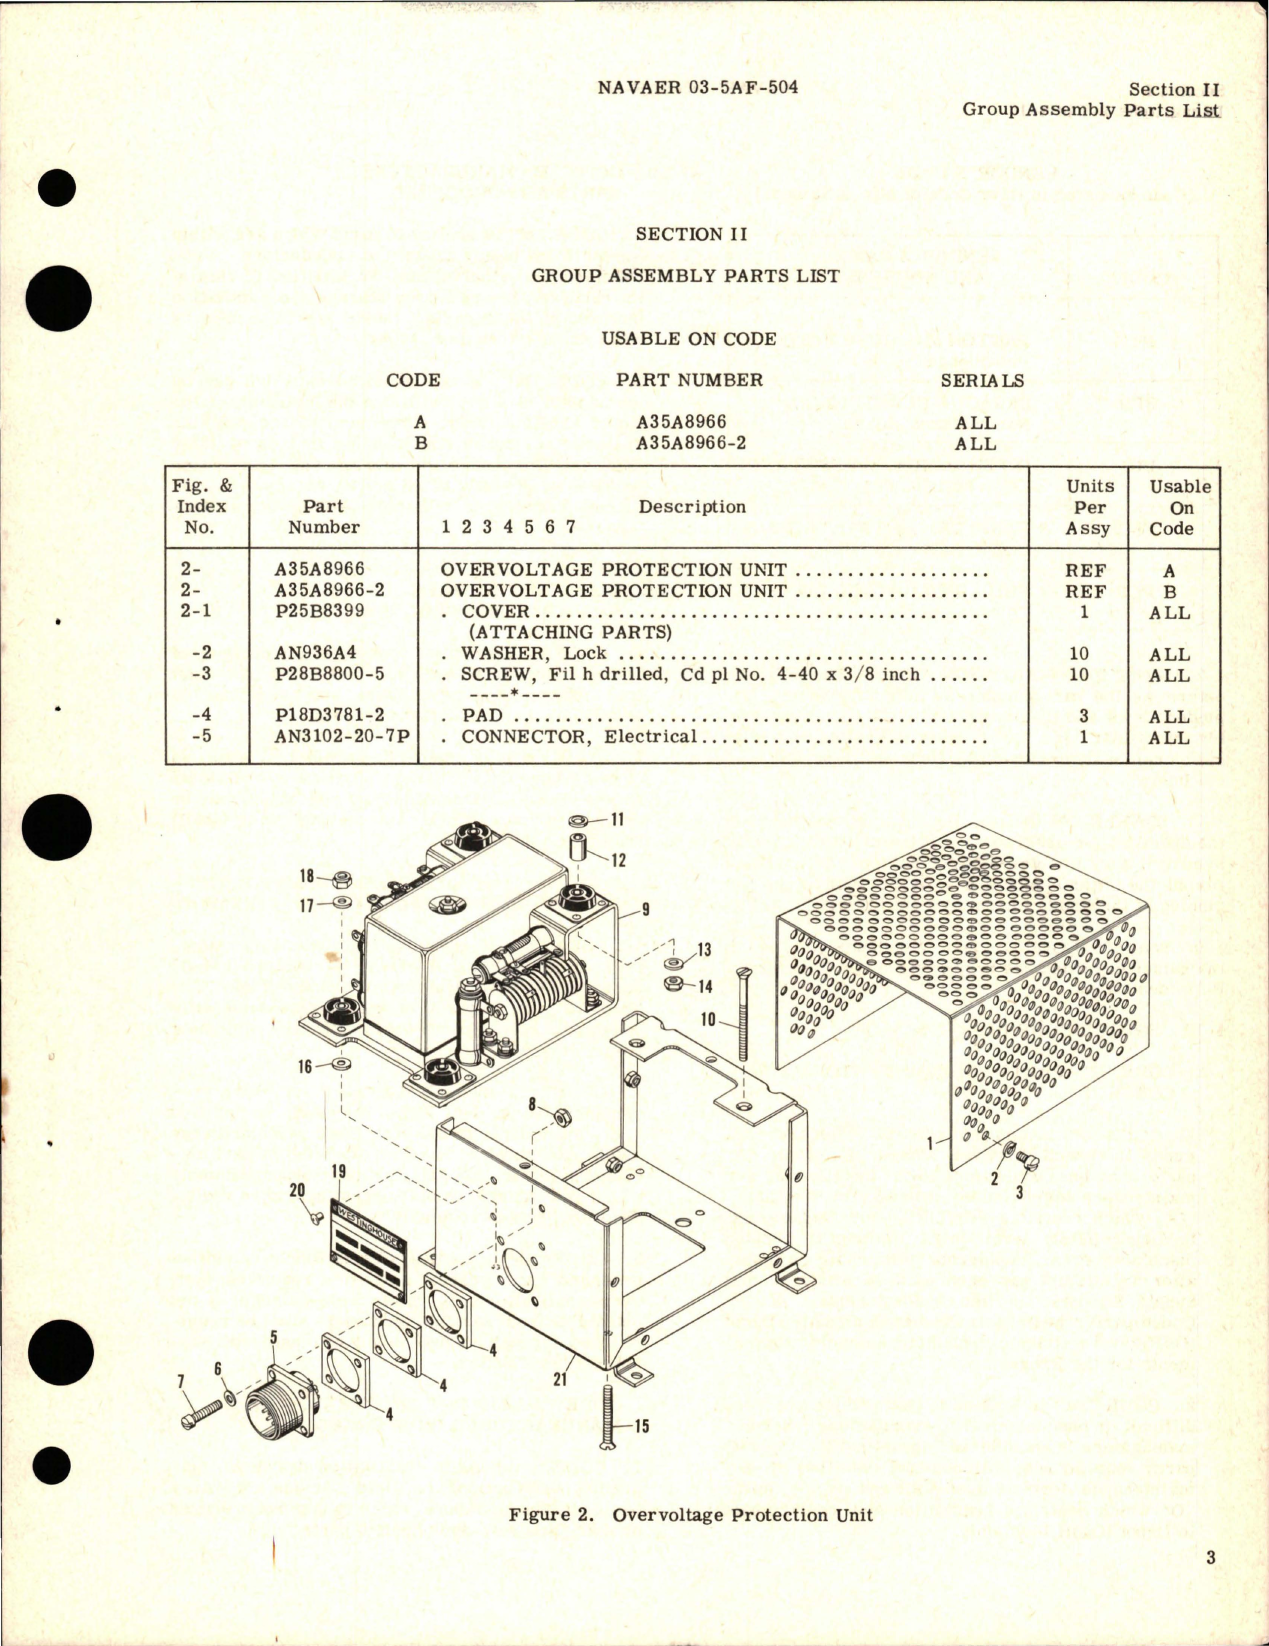 Sample page 5 from AirCorps Library document: Illustrated Parts Breakdown for Overvoltage Protection Unit - Model A35A8966 and A35A8966-2 